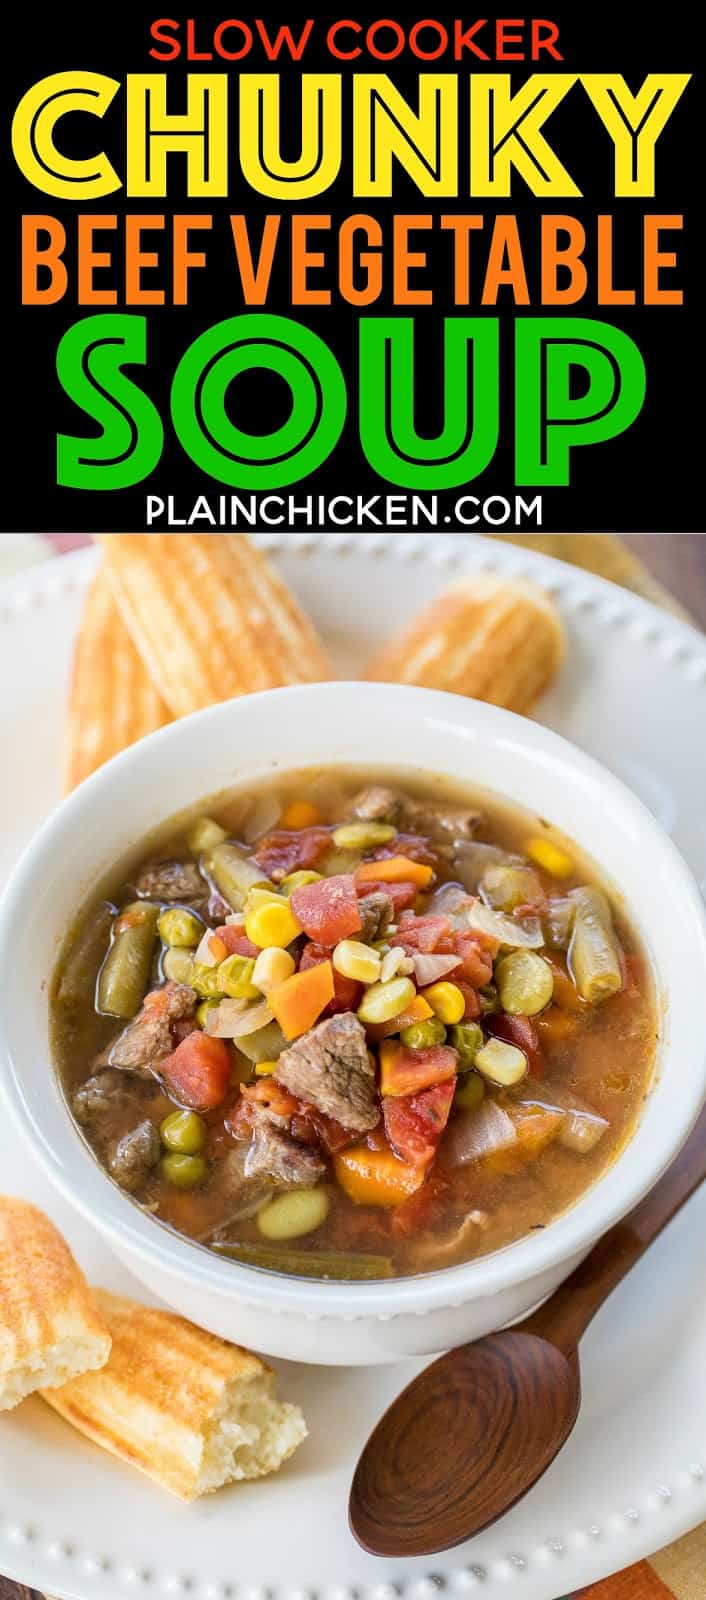 Slow Cooker Chunky Beef Vegetable Soup - seriously delicious! Stew meat, green beans, corn, lima beans, green peas, carrots, celery, onions and diced tomatoes slow cook all day long for an easy and delicious meal! Makes a ton! Freeze leftovers for later. Great for cool Fall and Winter nights! Everyone LOVES this easy slow cooker recipe.